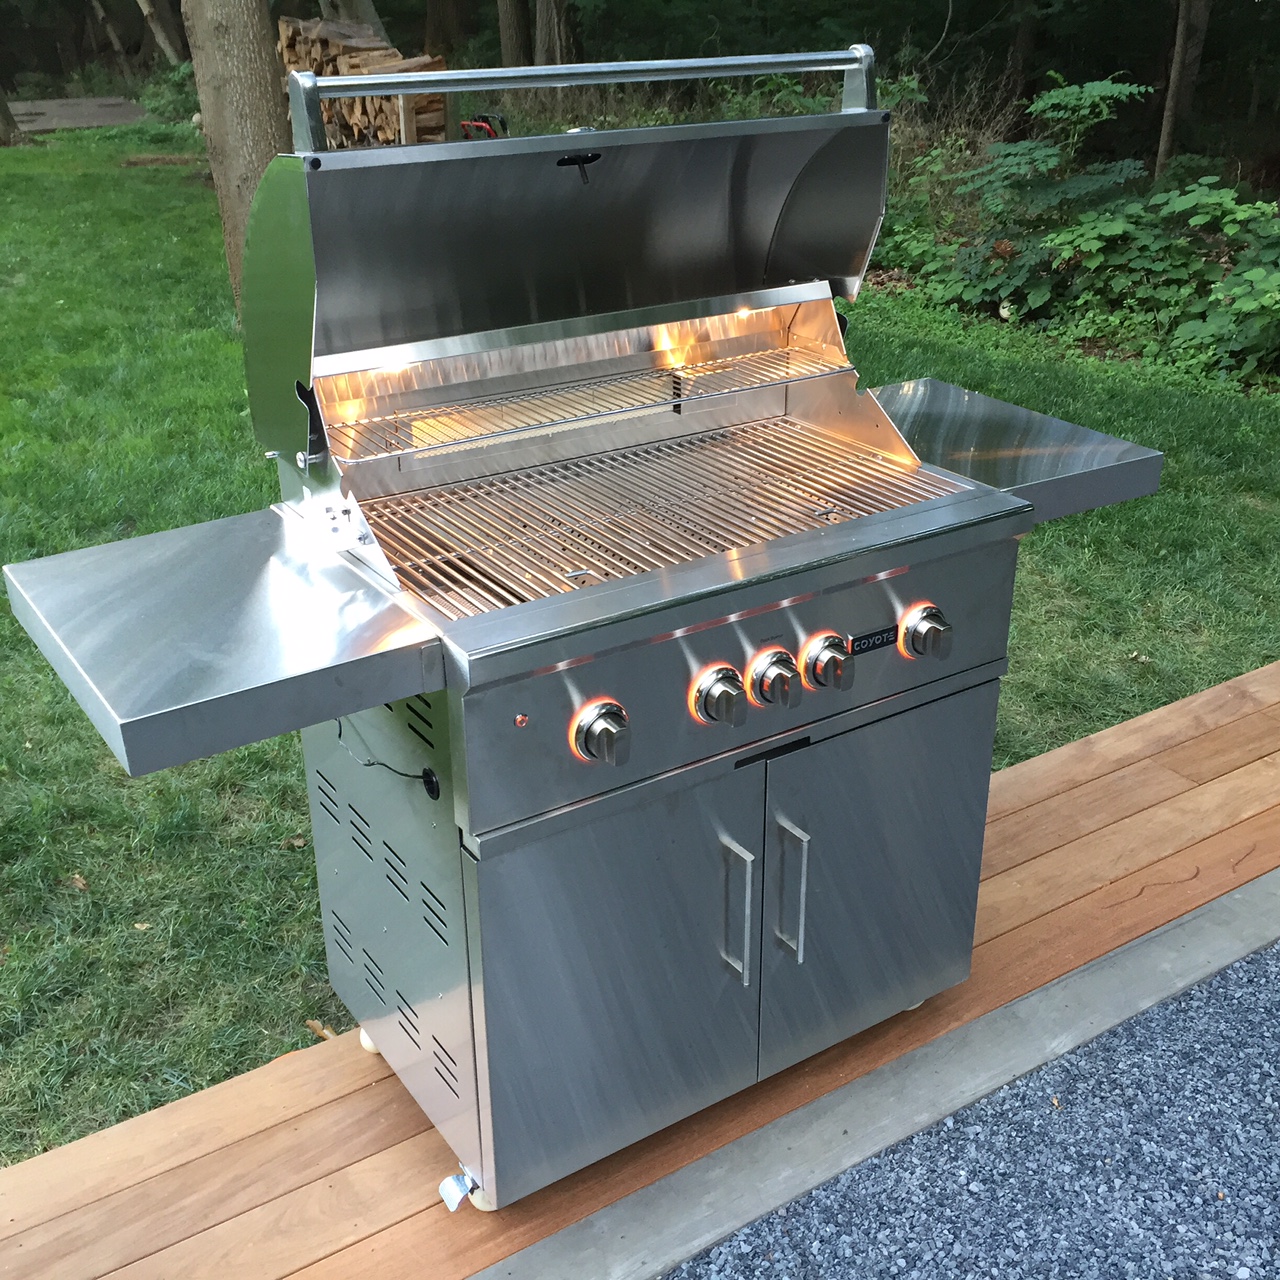 Unboxing Coyote Grill for Outdoor Kitchen | Jon Peters Art & Home1280 x 1280